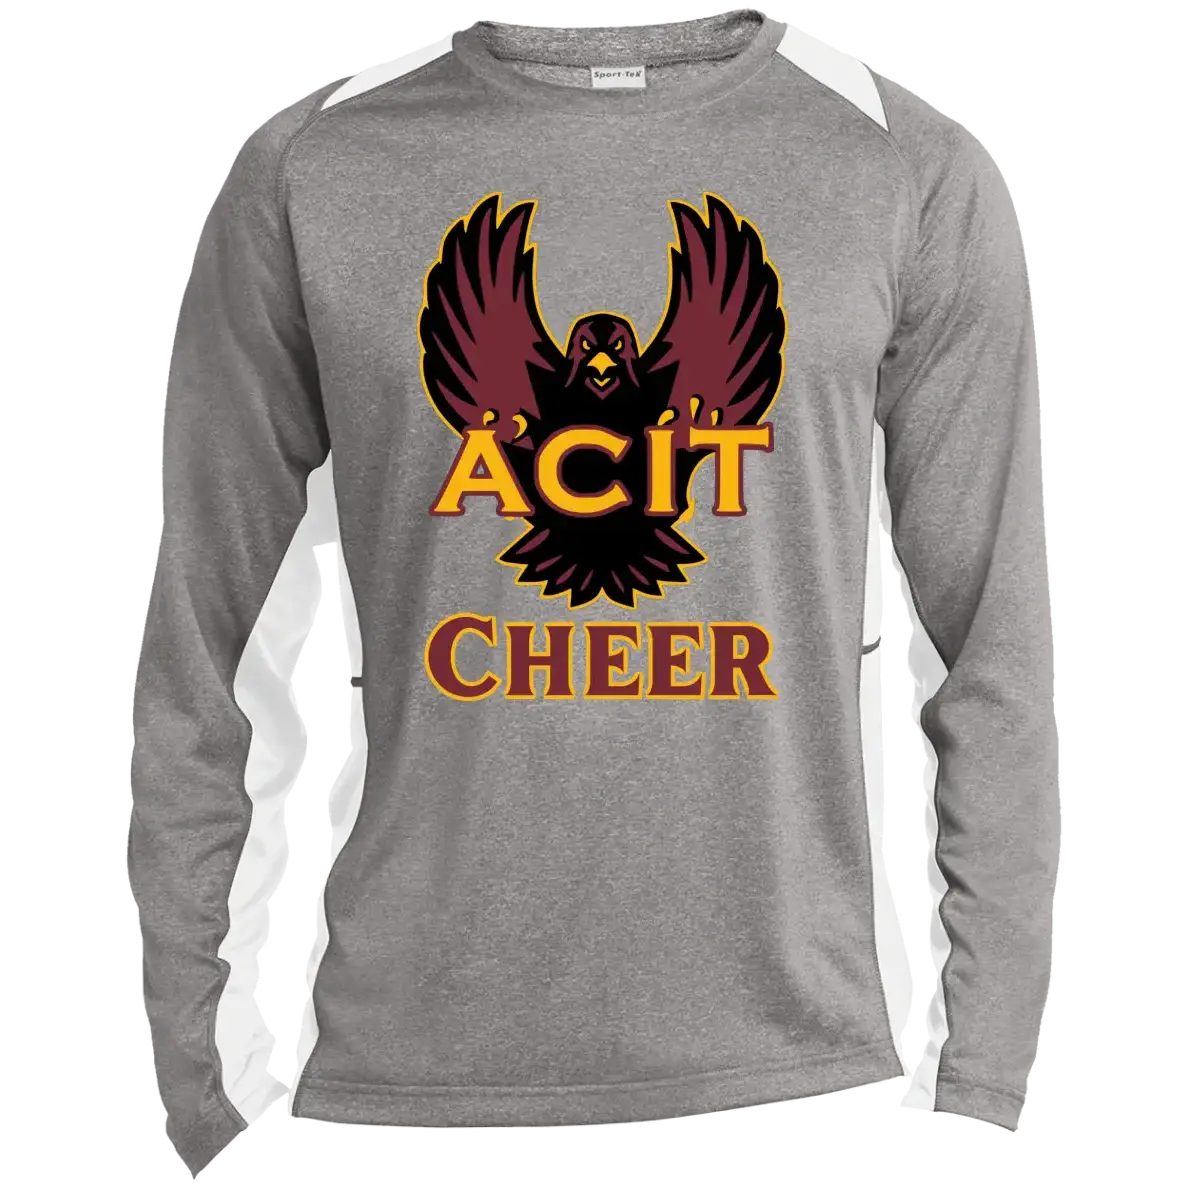 ACIT Cheer Long Sleeve Tees (Men's and Women's Choices)